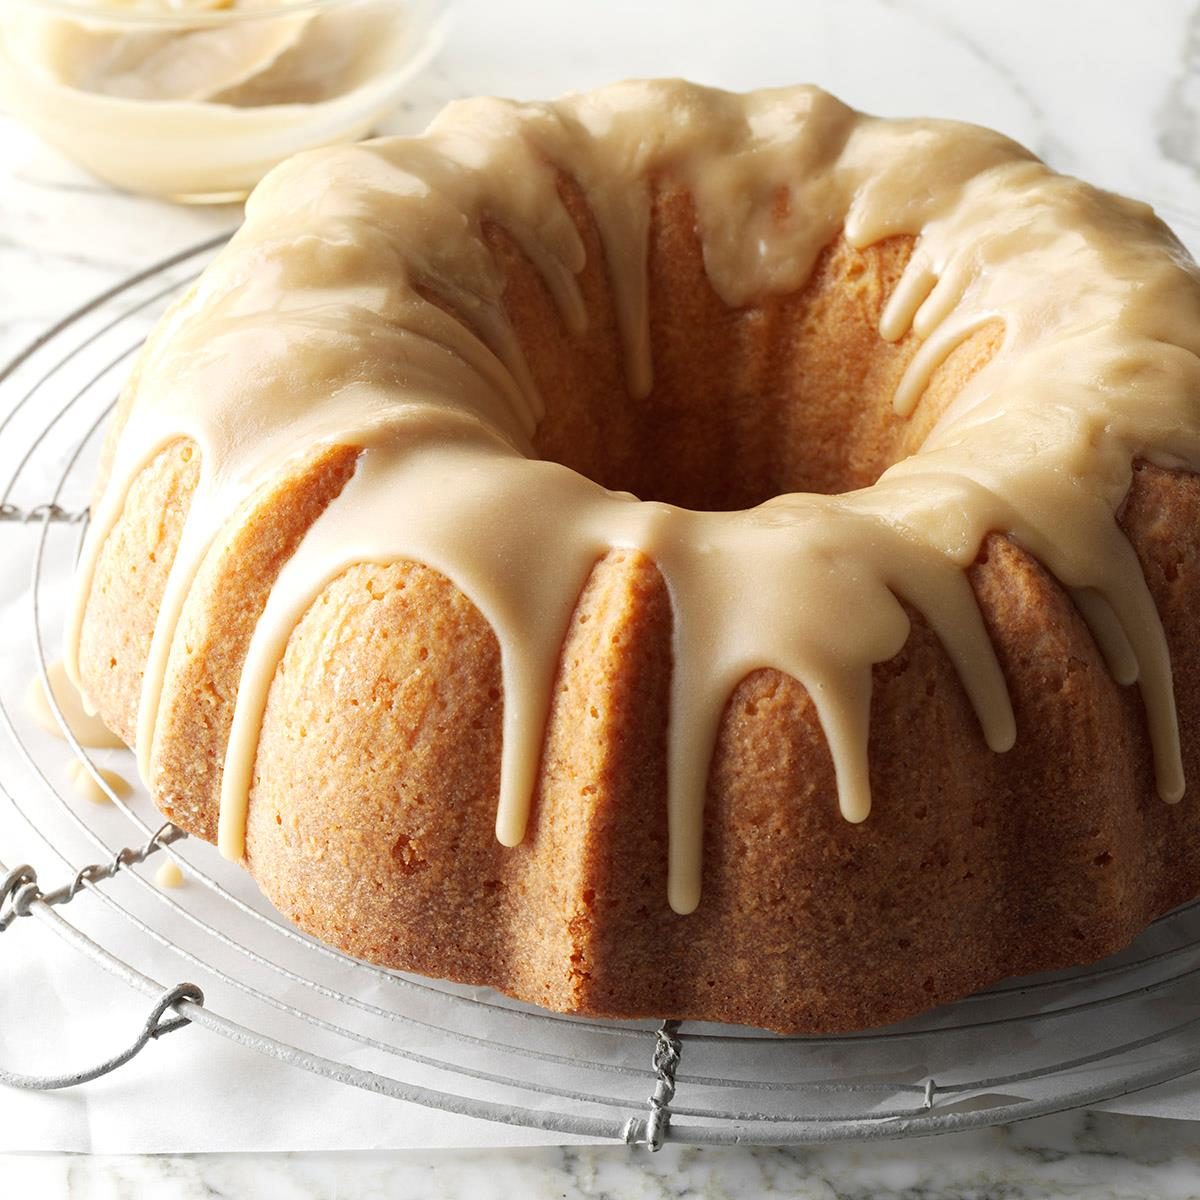 Buttermilk Cake With Caramel Icing Exps Cwfm17 38027 C10 11 2b 23